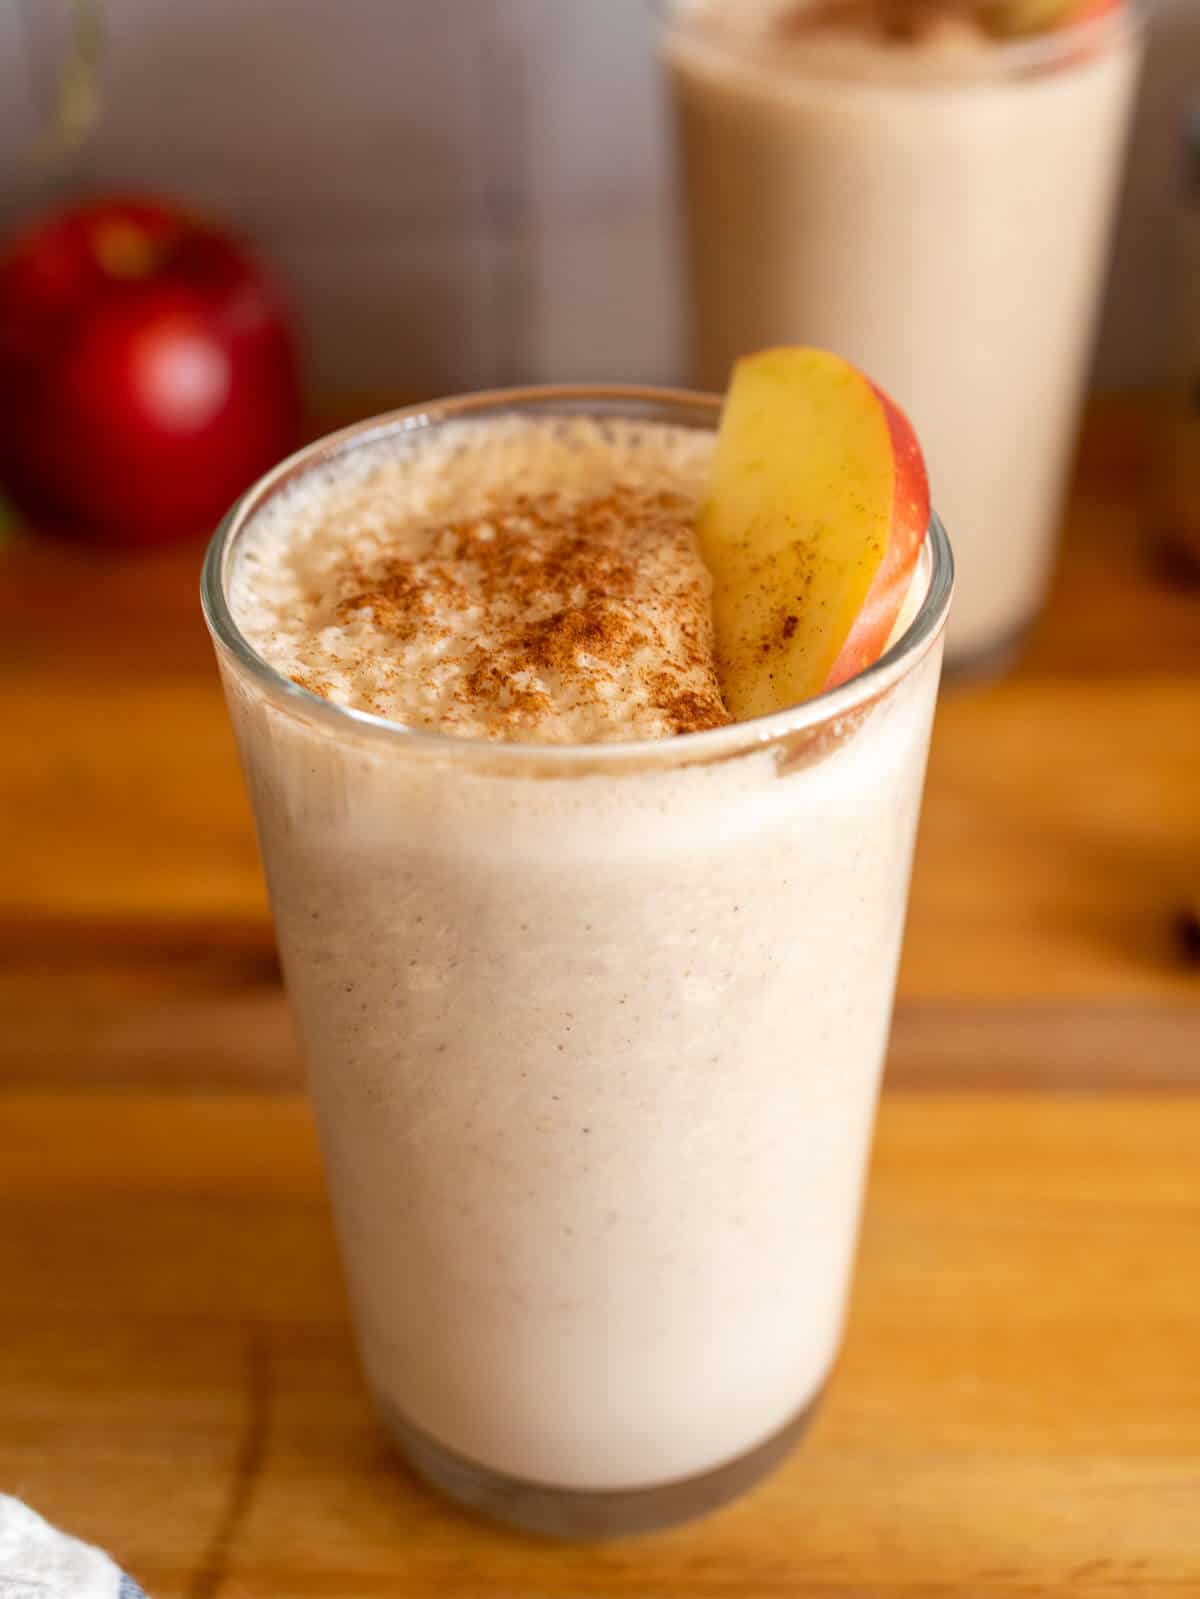 topping the apple cinnamon smoothie with extra ground cinnamon